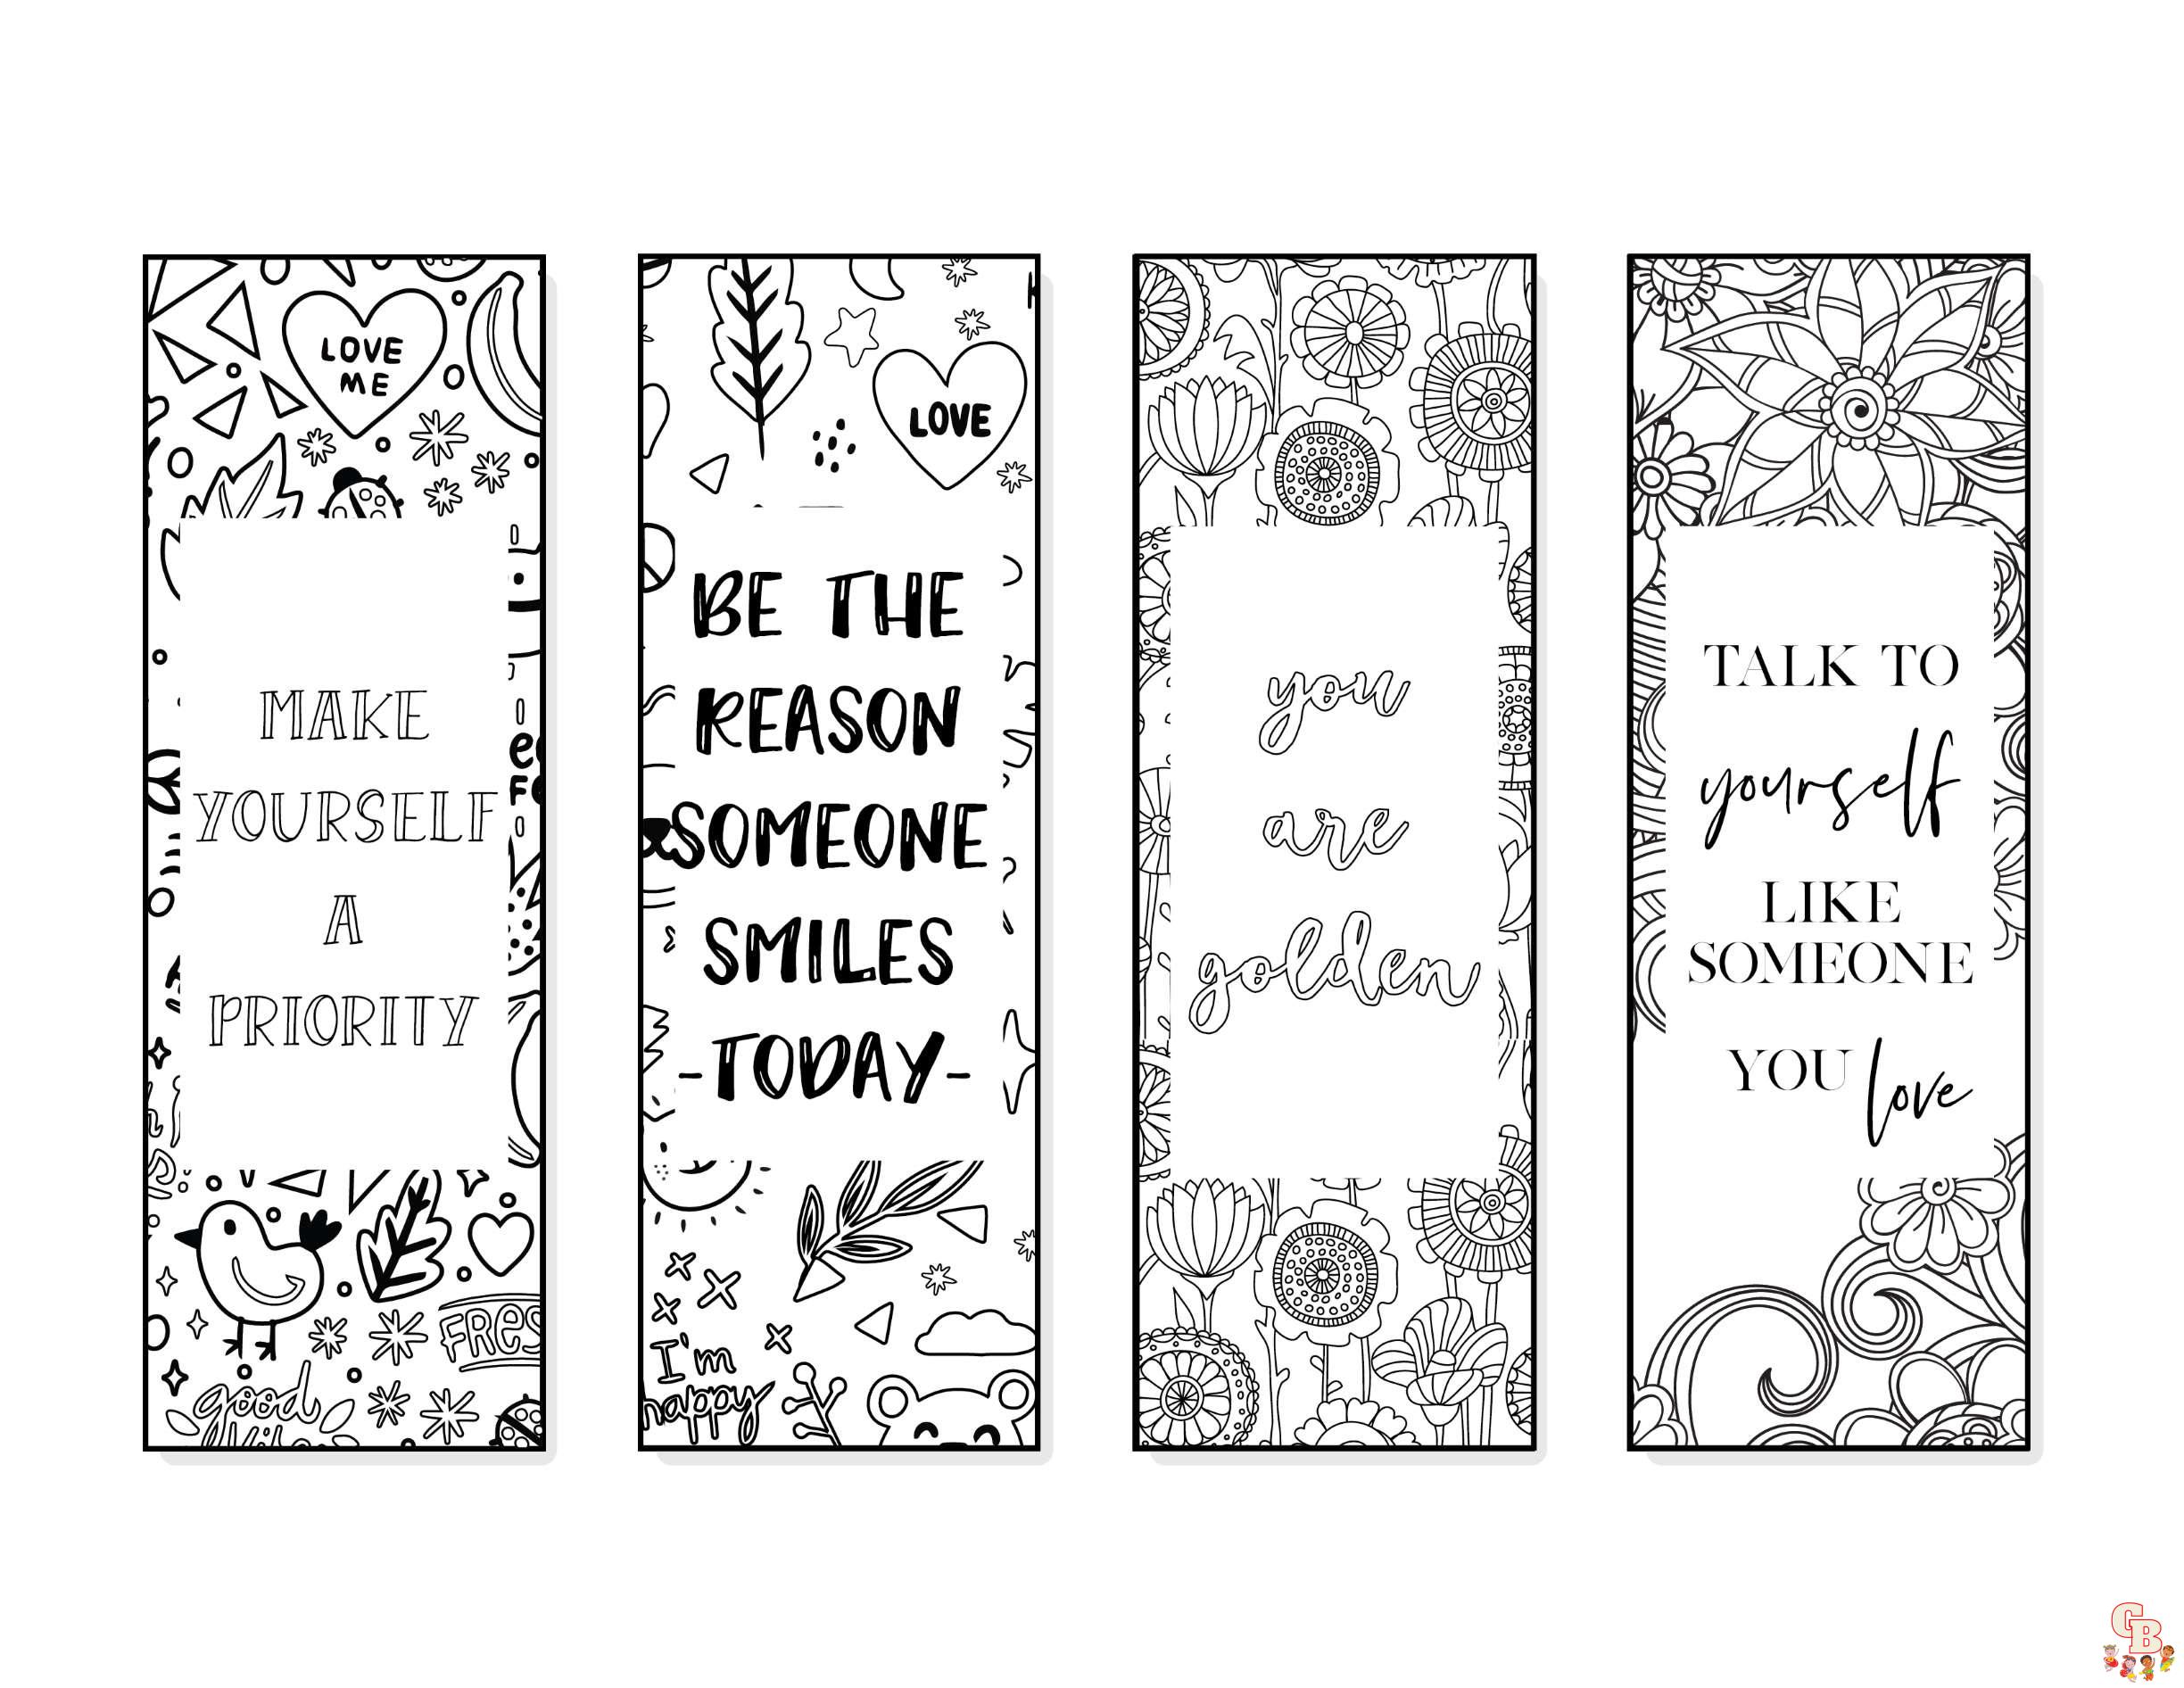 Bookmark Coloring Pages